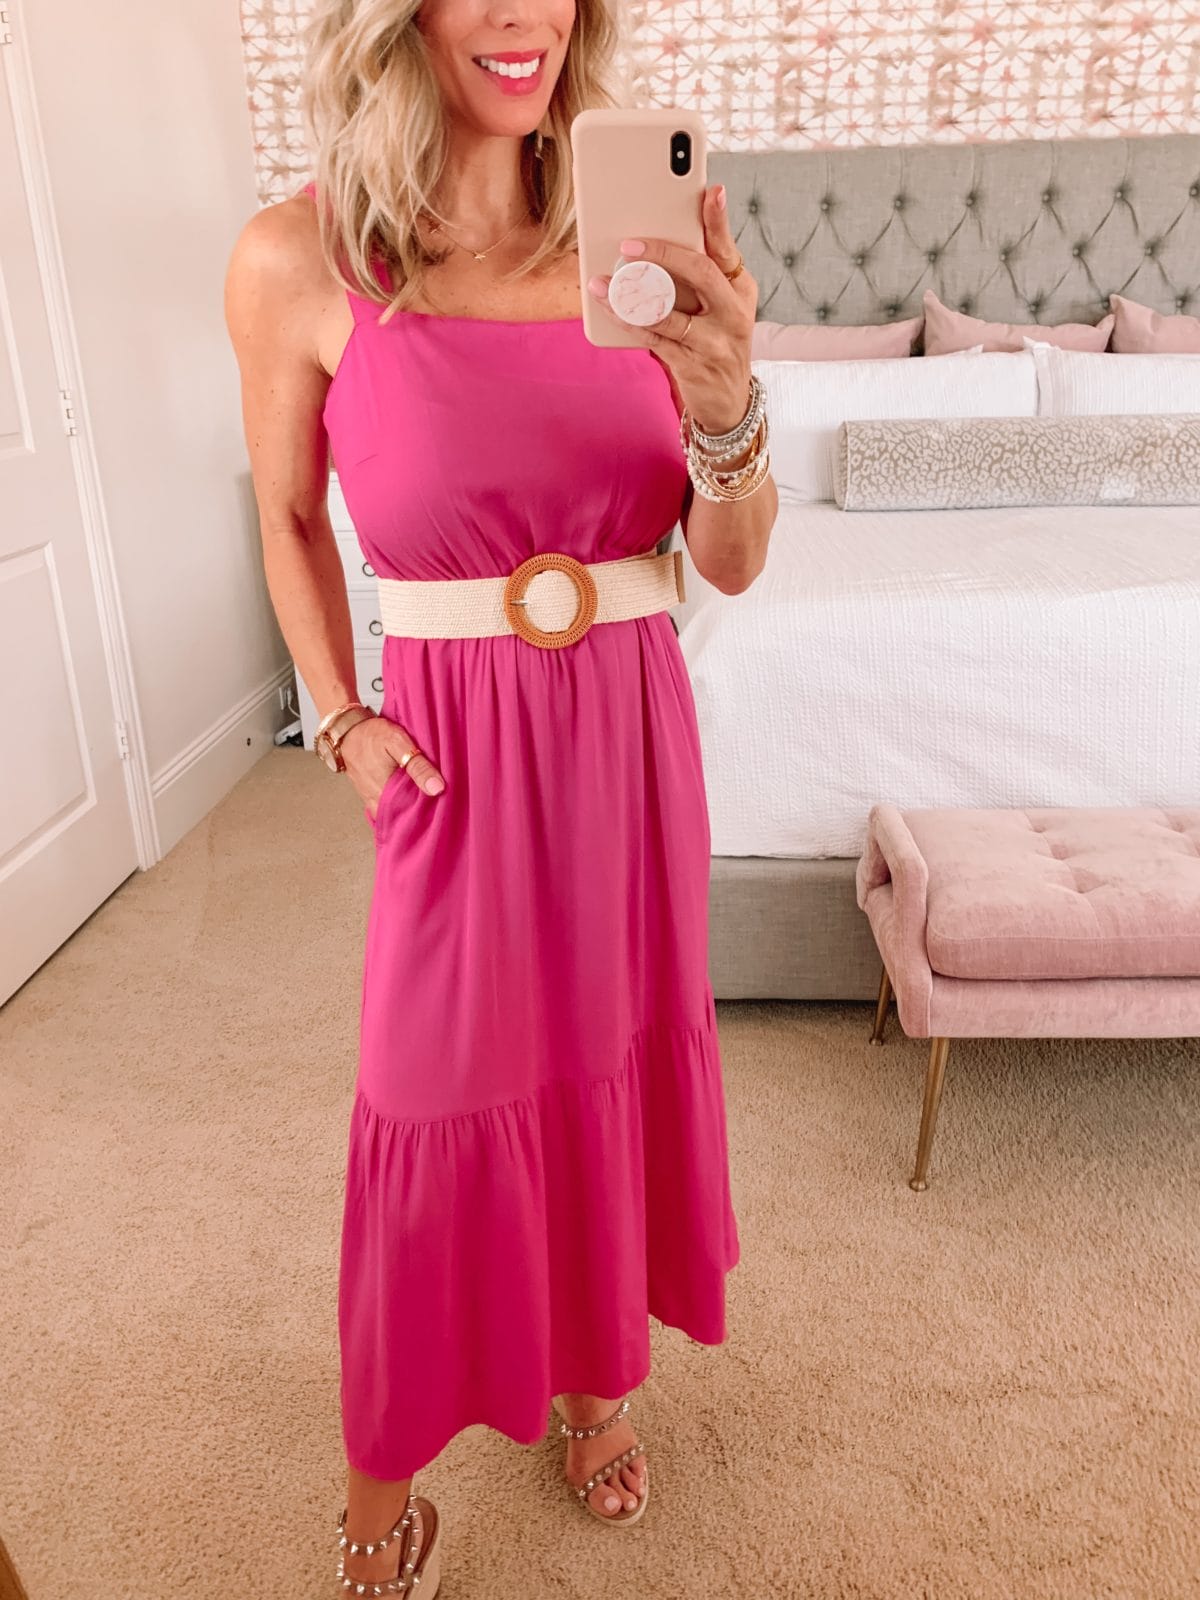 Amazon Fashion Faves, Pink maxi Dress, Studded Wedges and Woven Belt 